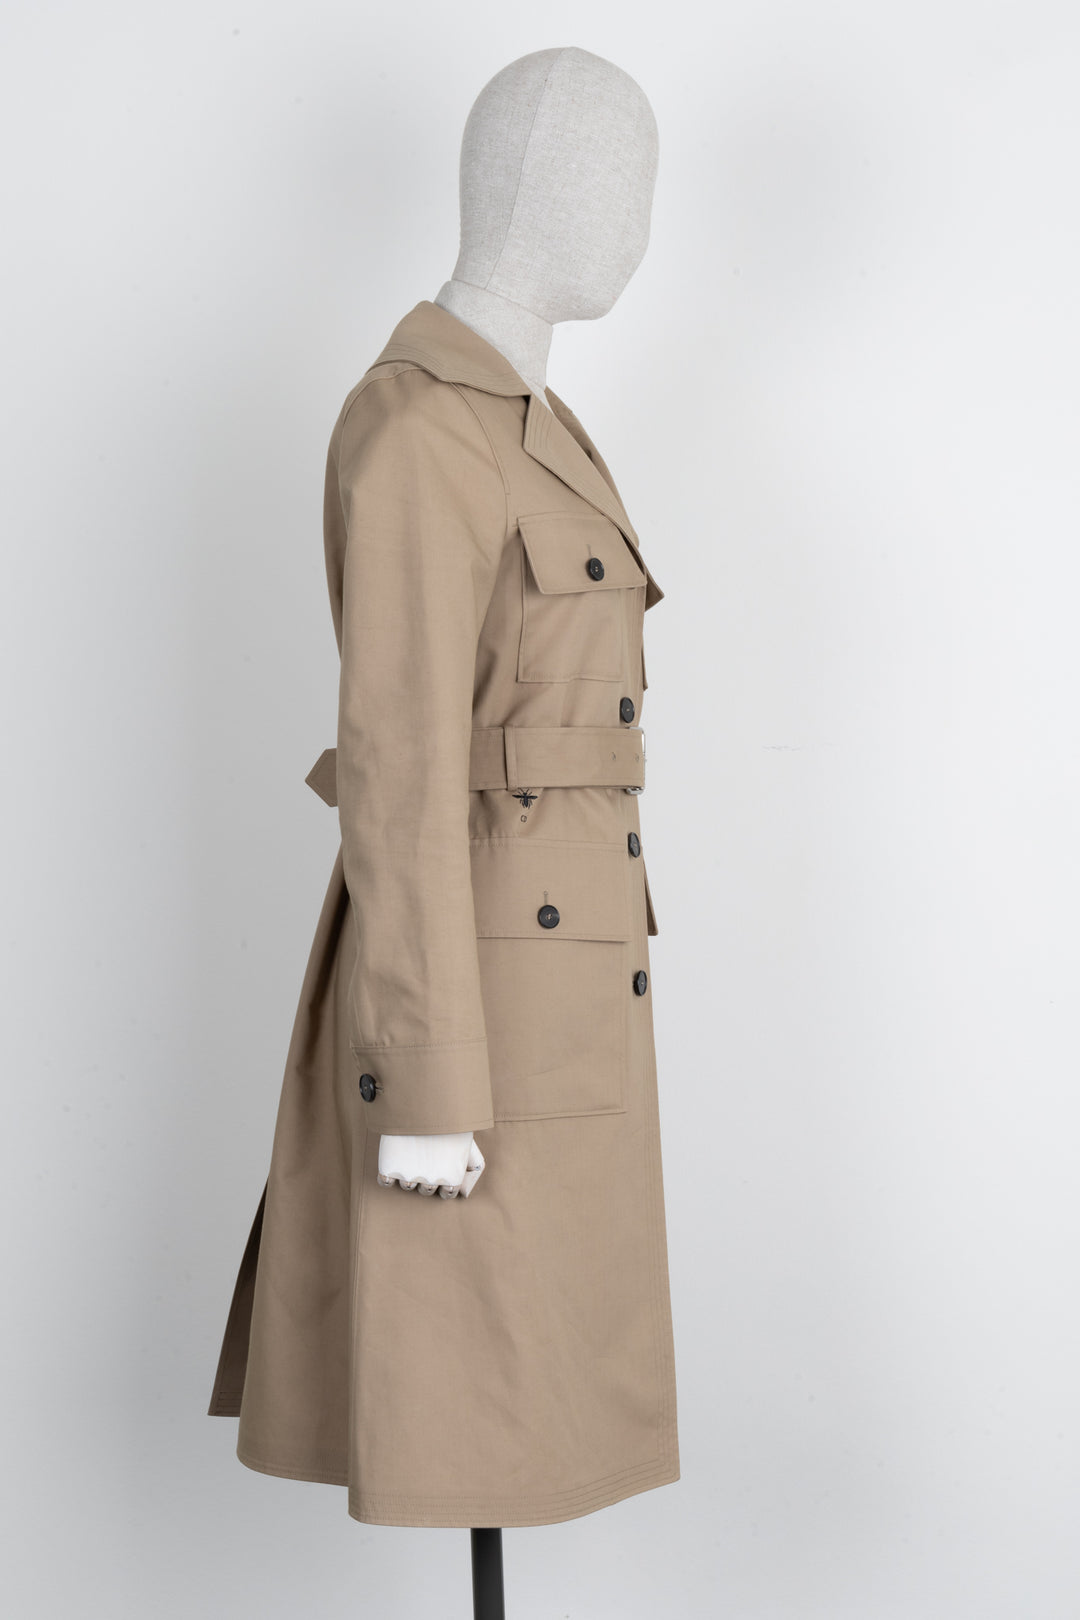 CHRISTIAN DIOR Trench Coat Beige